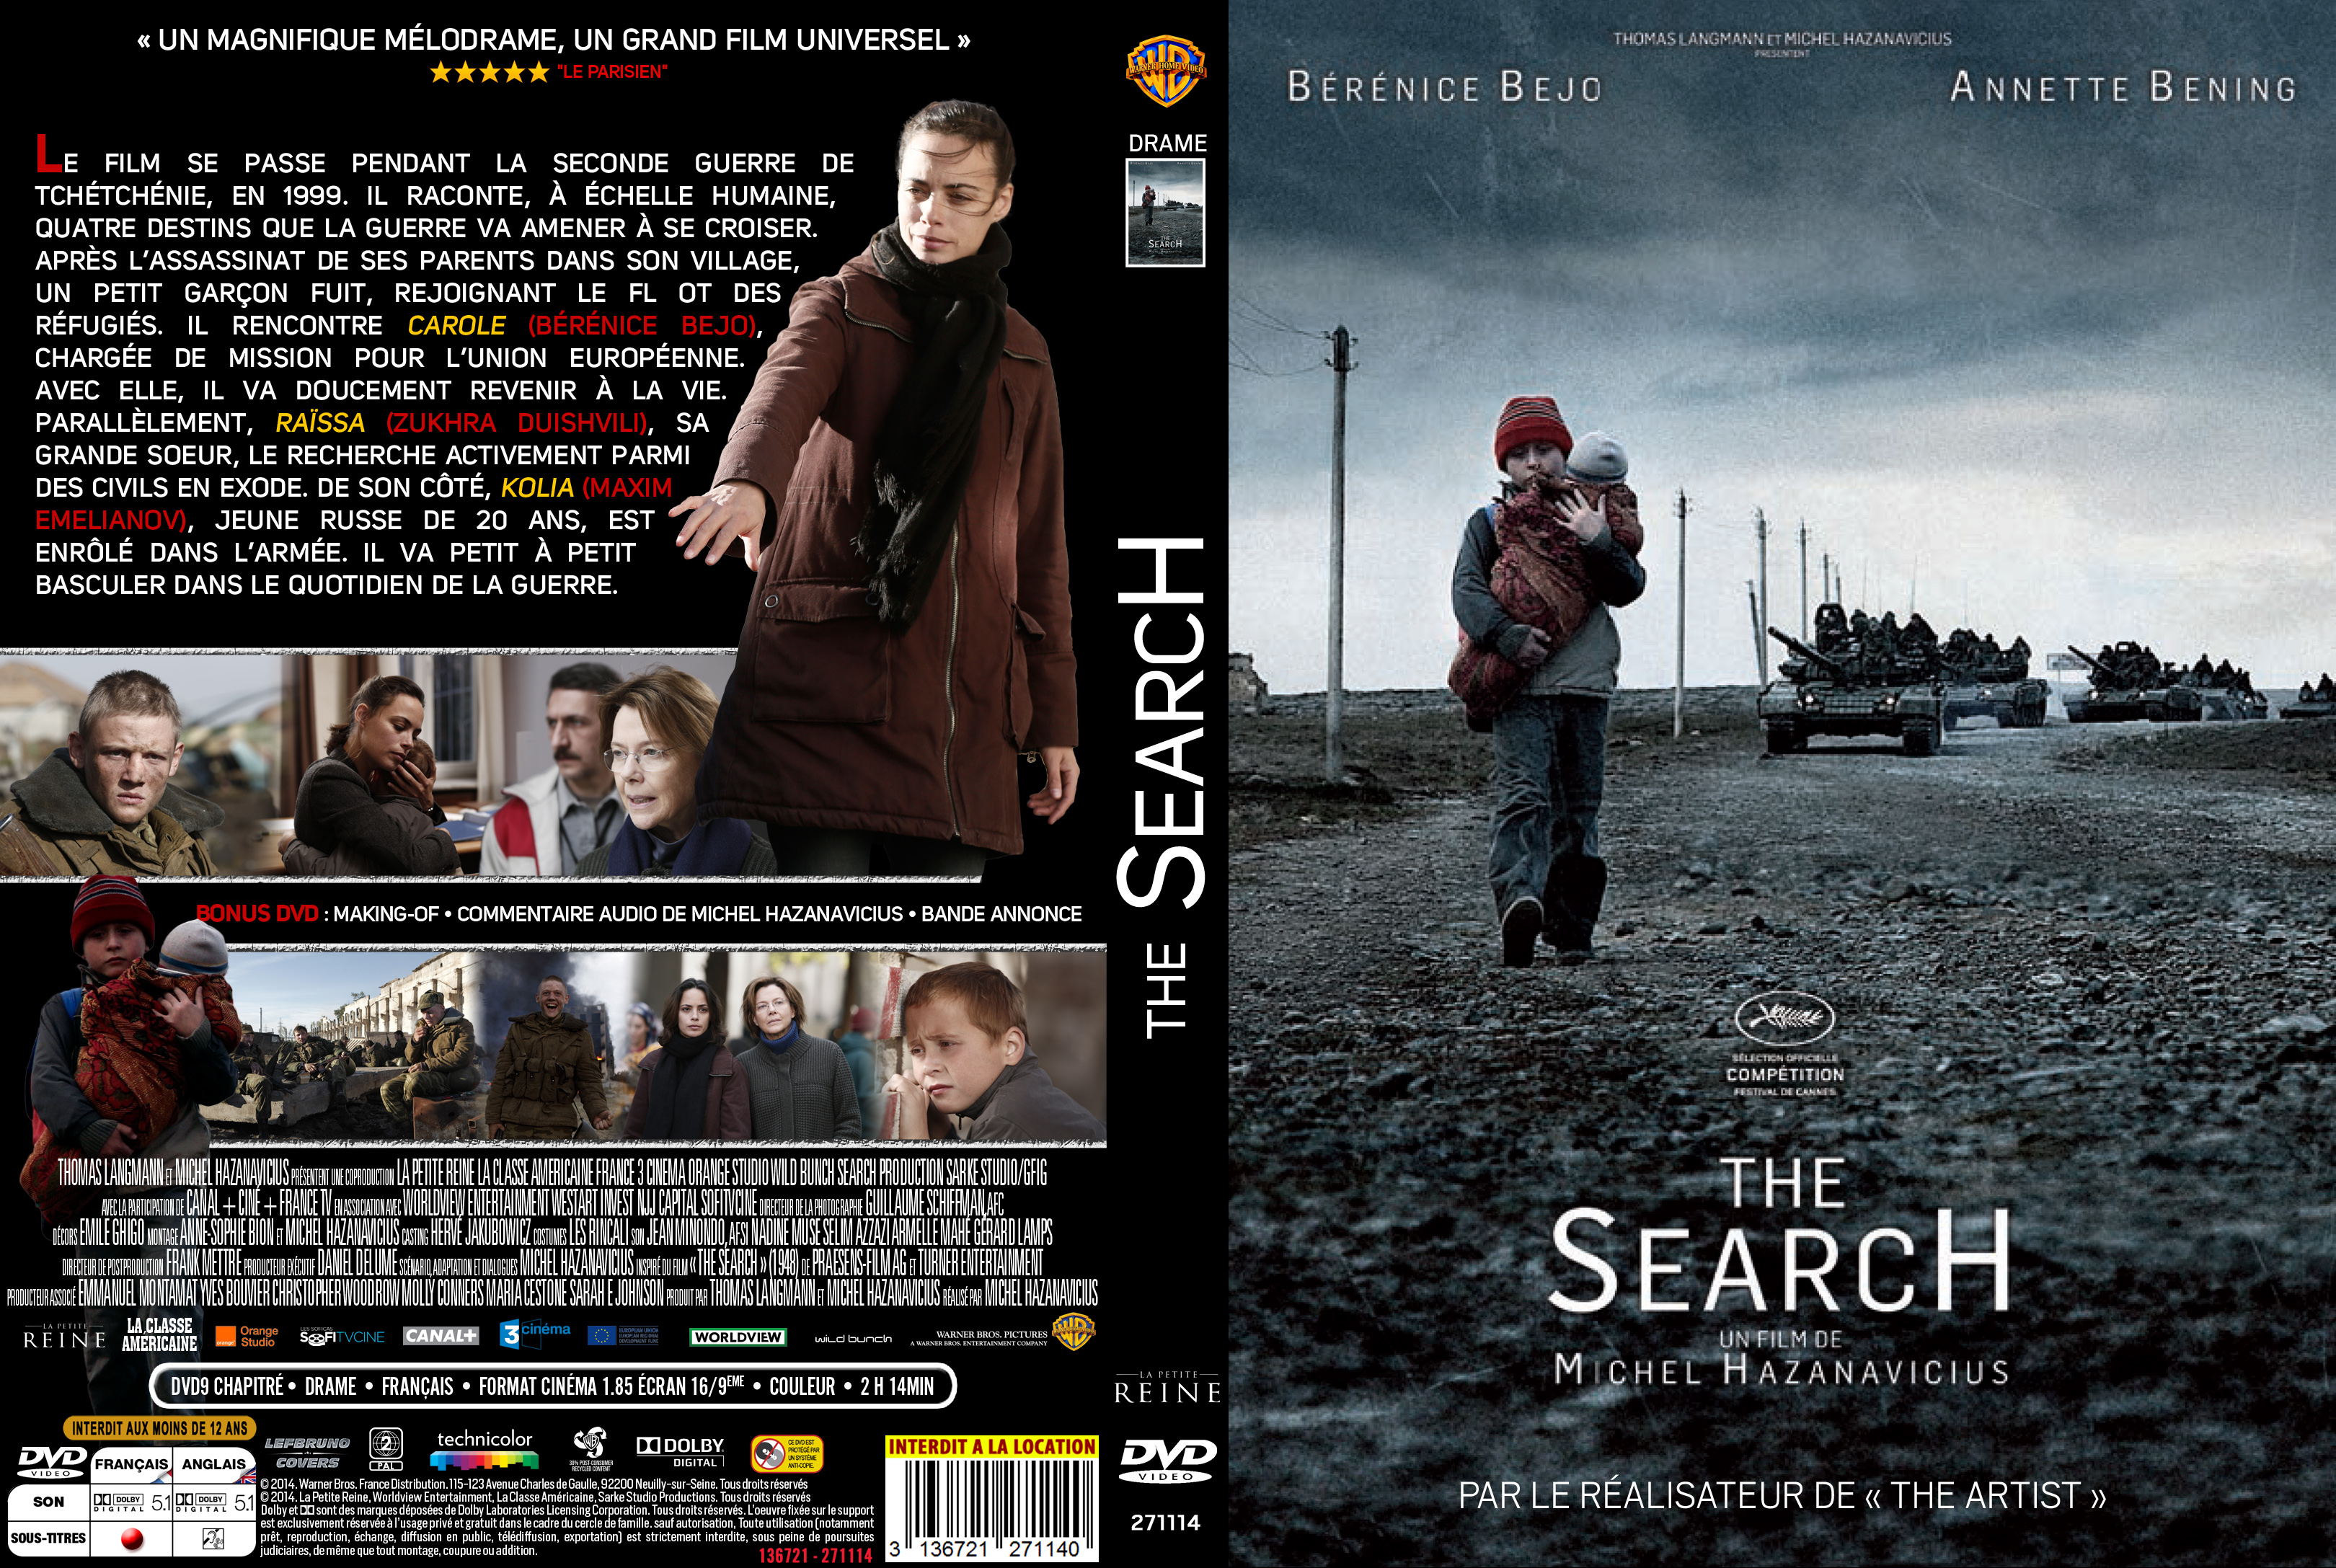 Jaquette DVD The Search custom